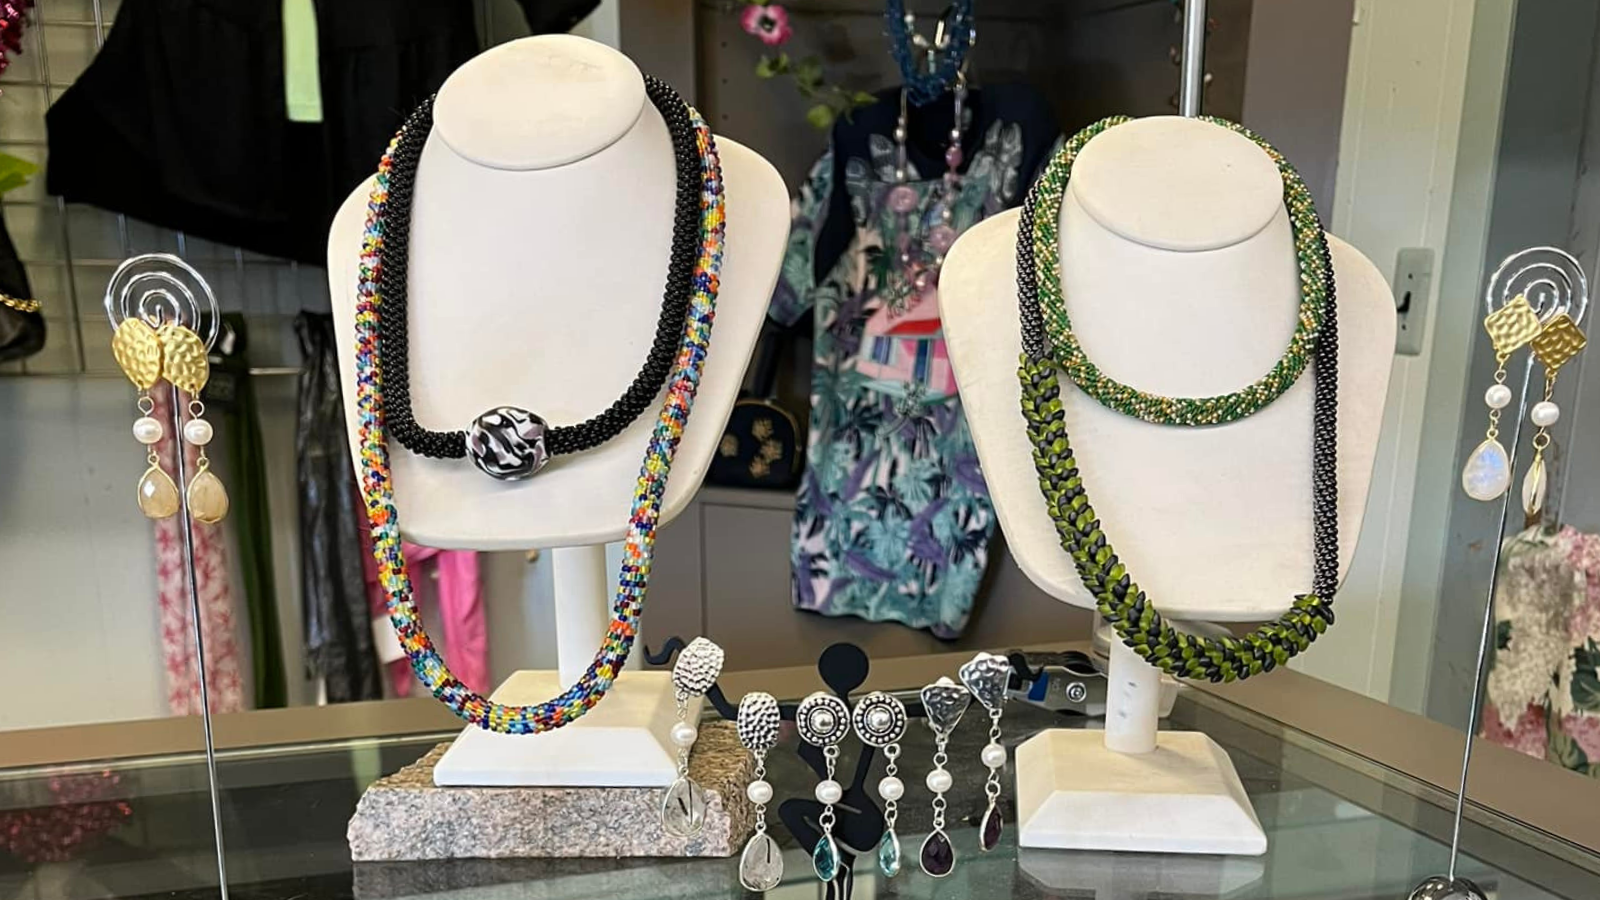 beautiful necklaces displayed in the store